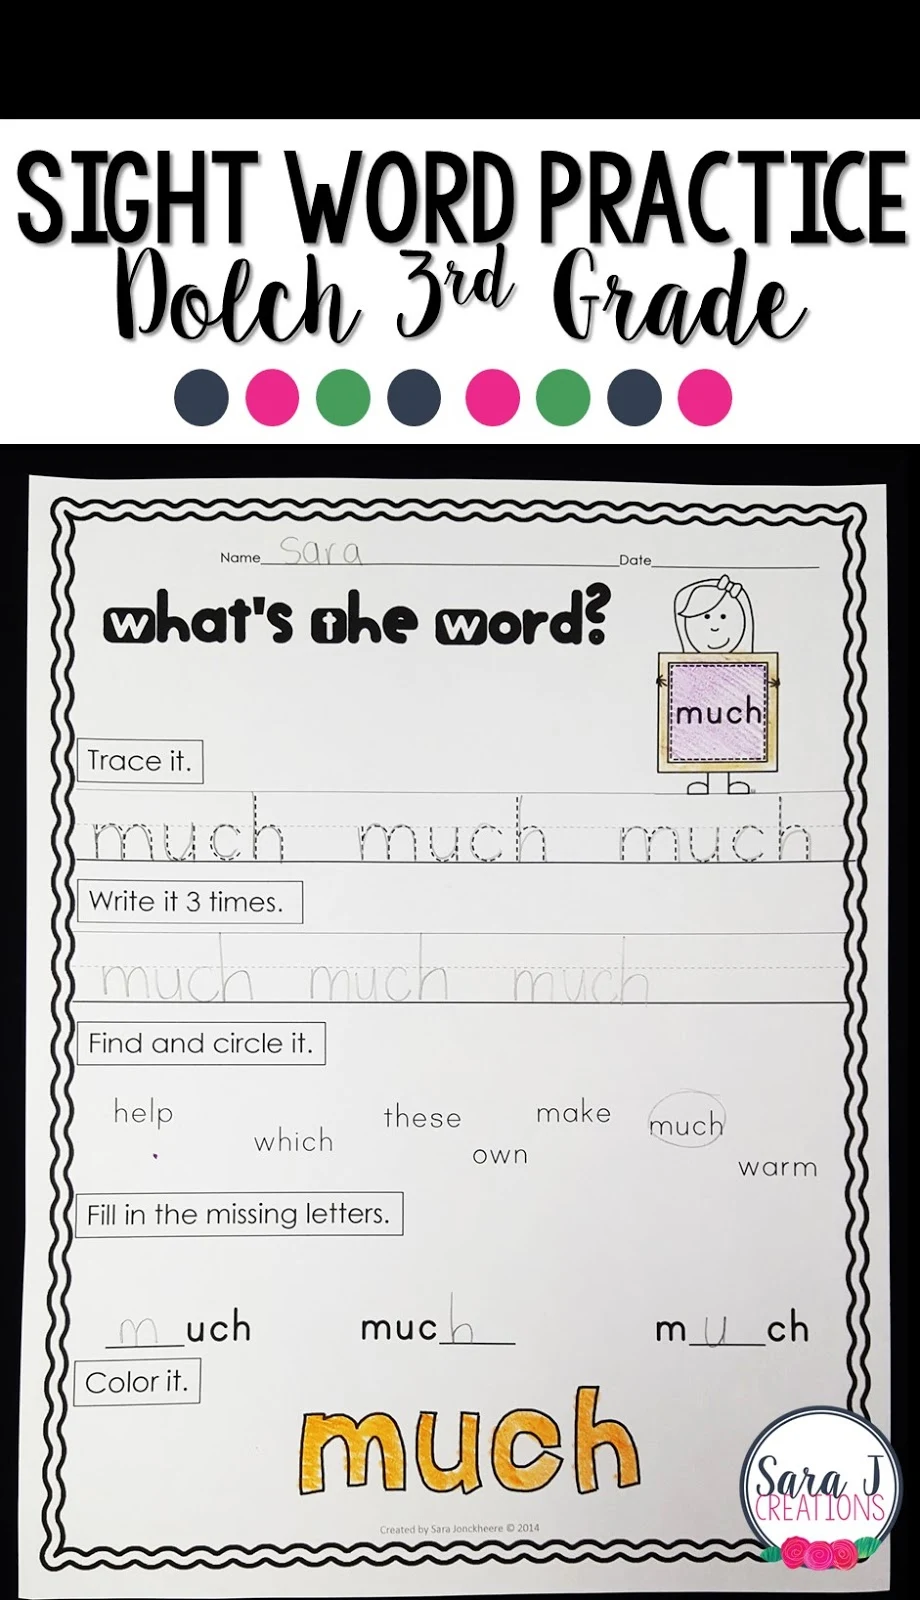 Dolch sight word practice printables are an easy way to have students practice tracing, writing, identifying and coloring words.